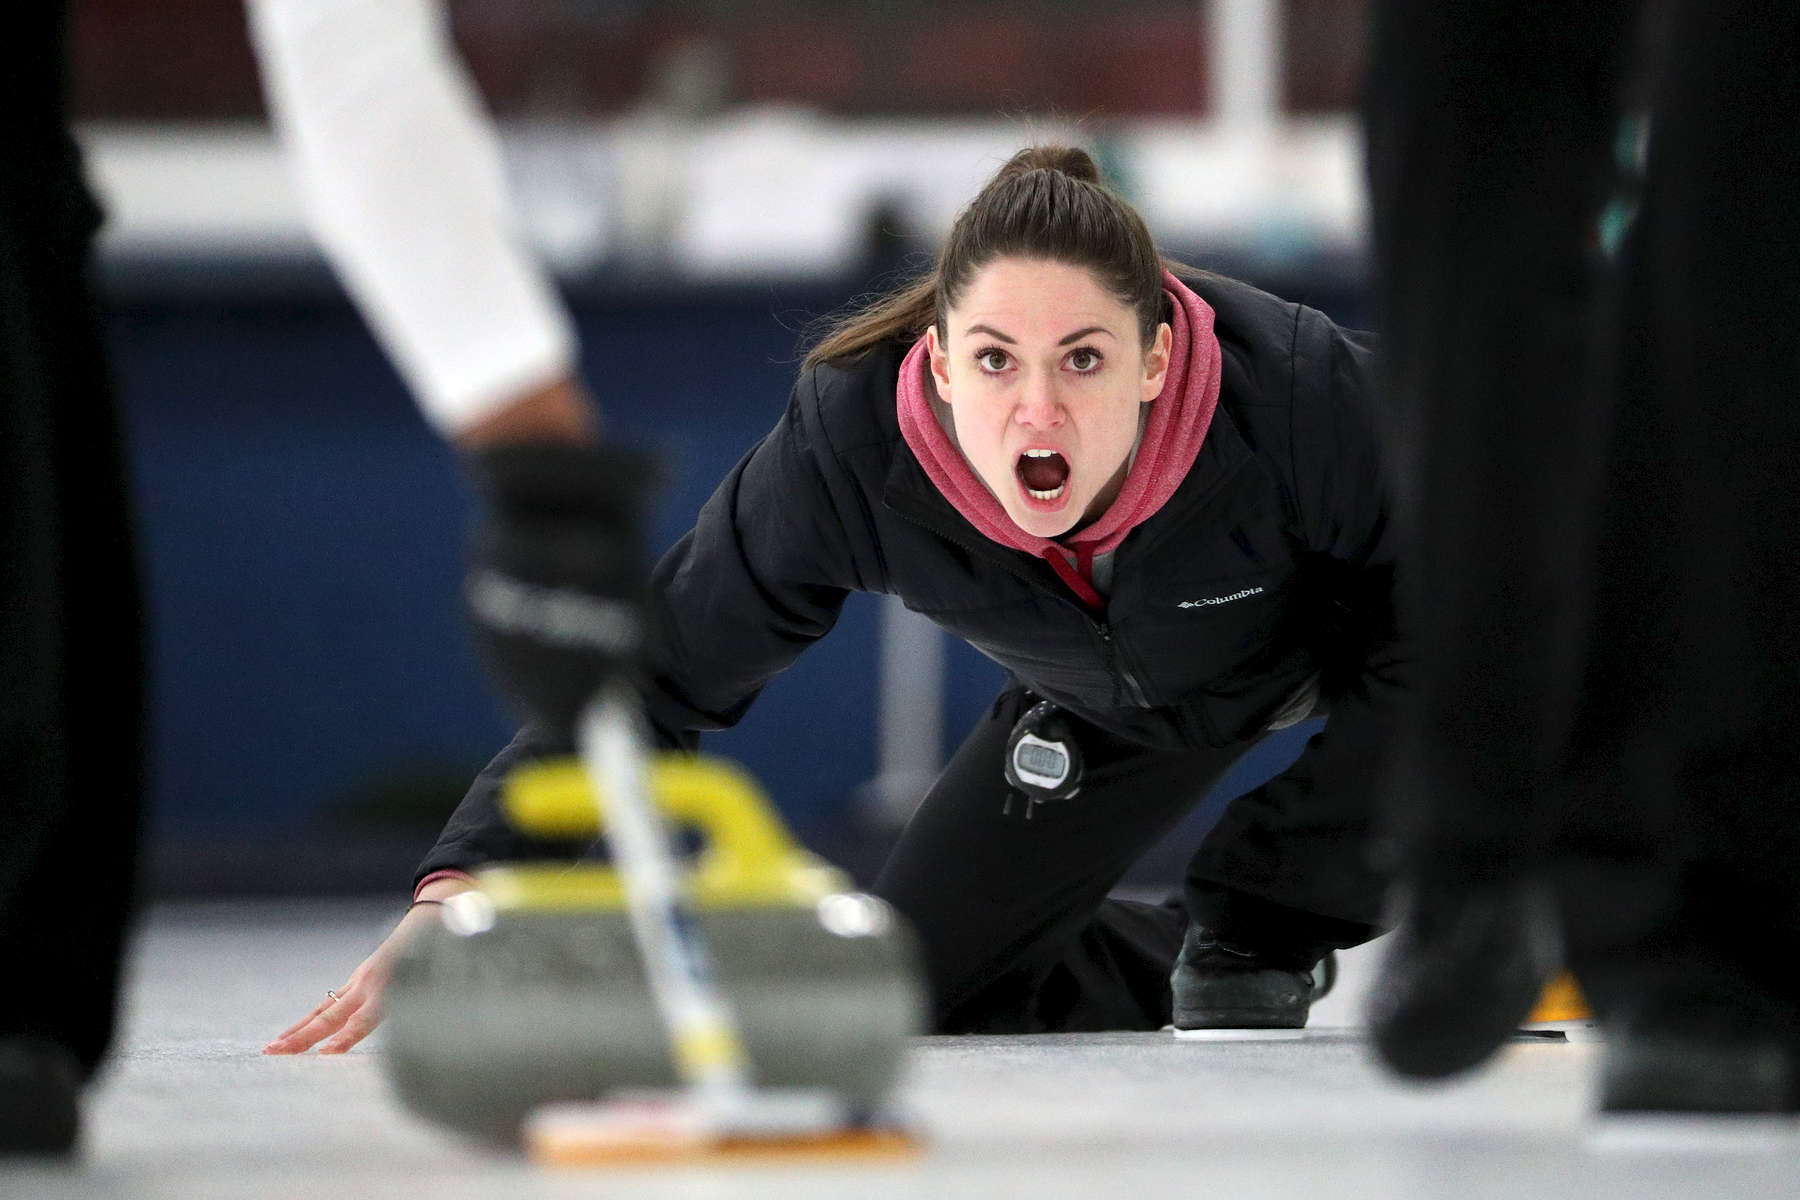 Curler Jamie Sinclair shouted directions as she practiced with teammates Vicky Persinger and Monica Walker at the Four Seasons Curling Club, the official U.S. Olympic training site, in Blaine, Minn.